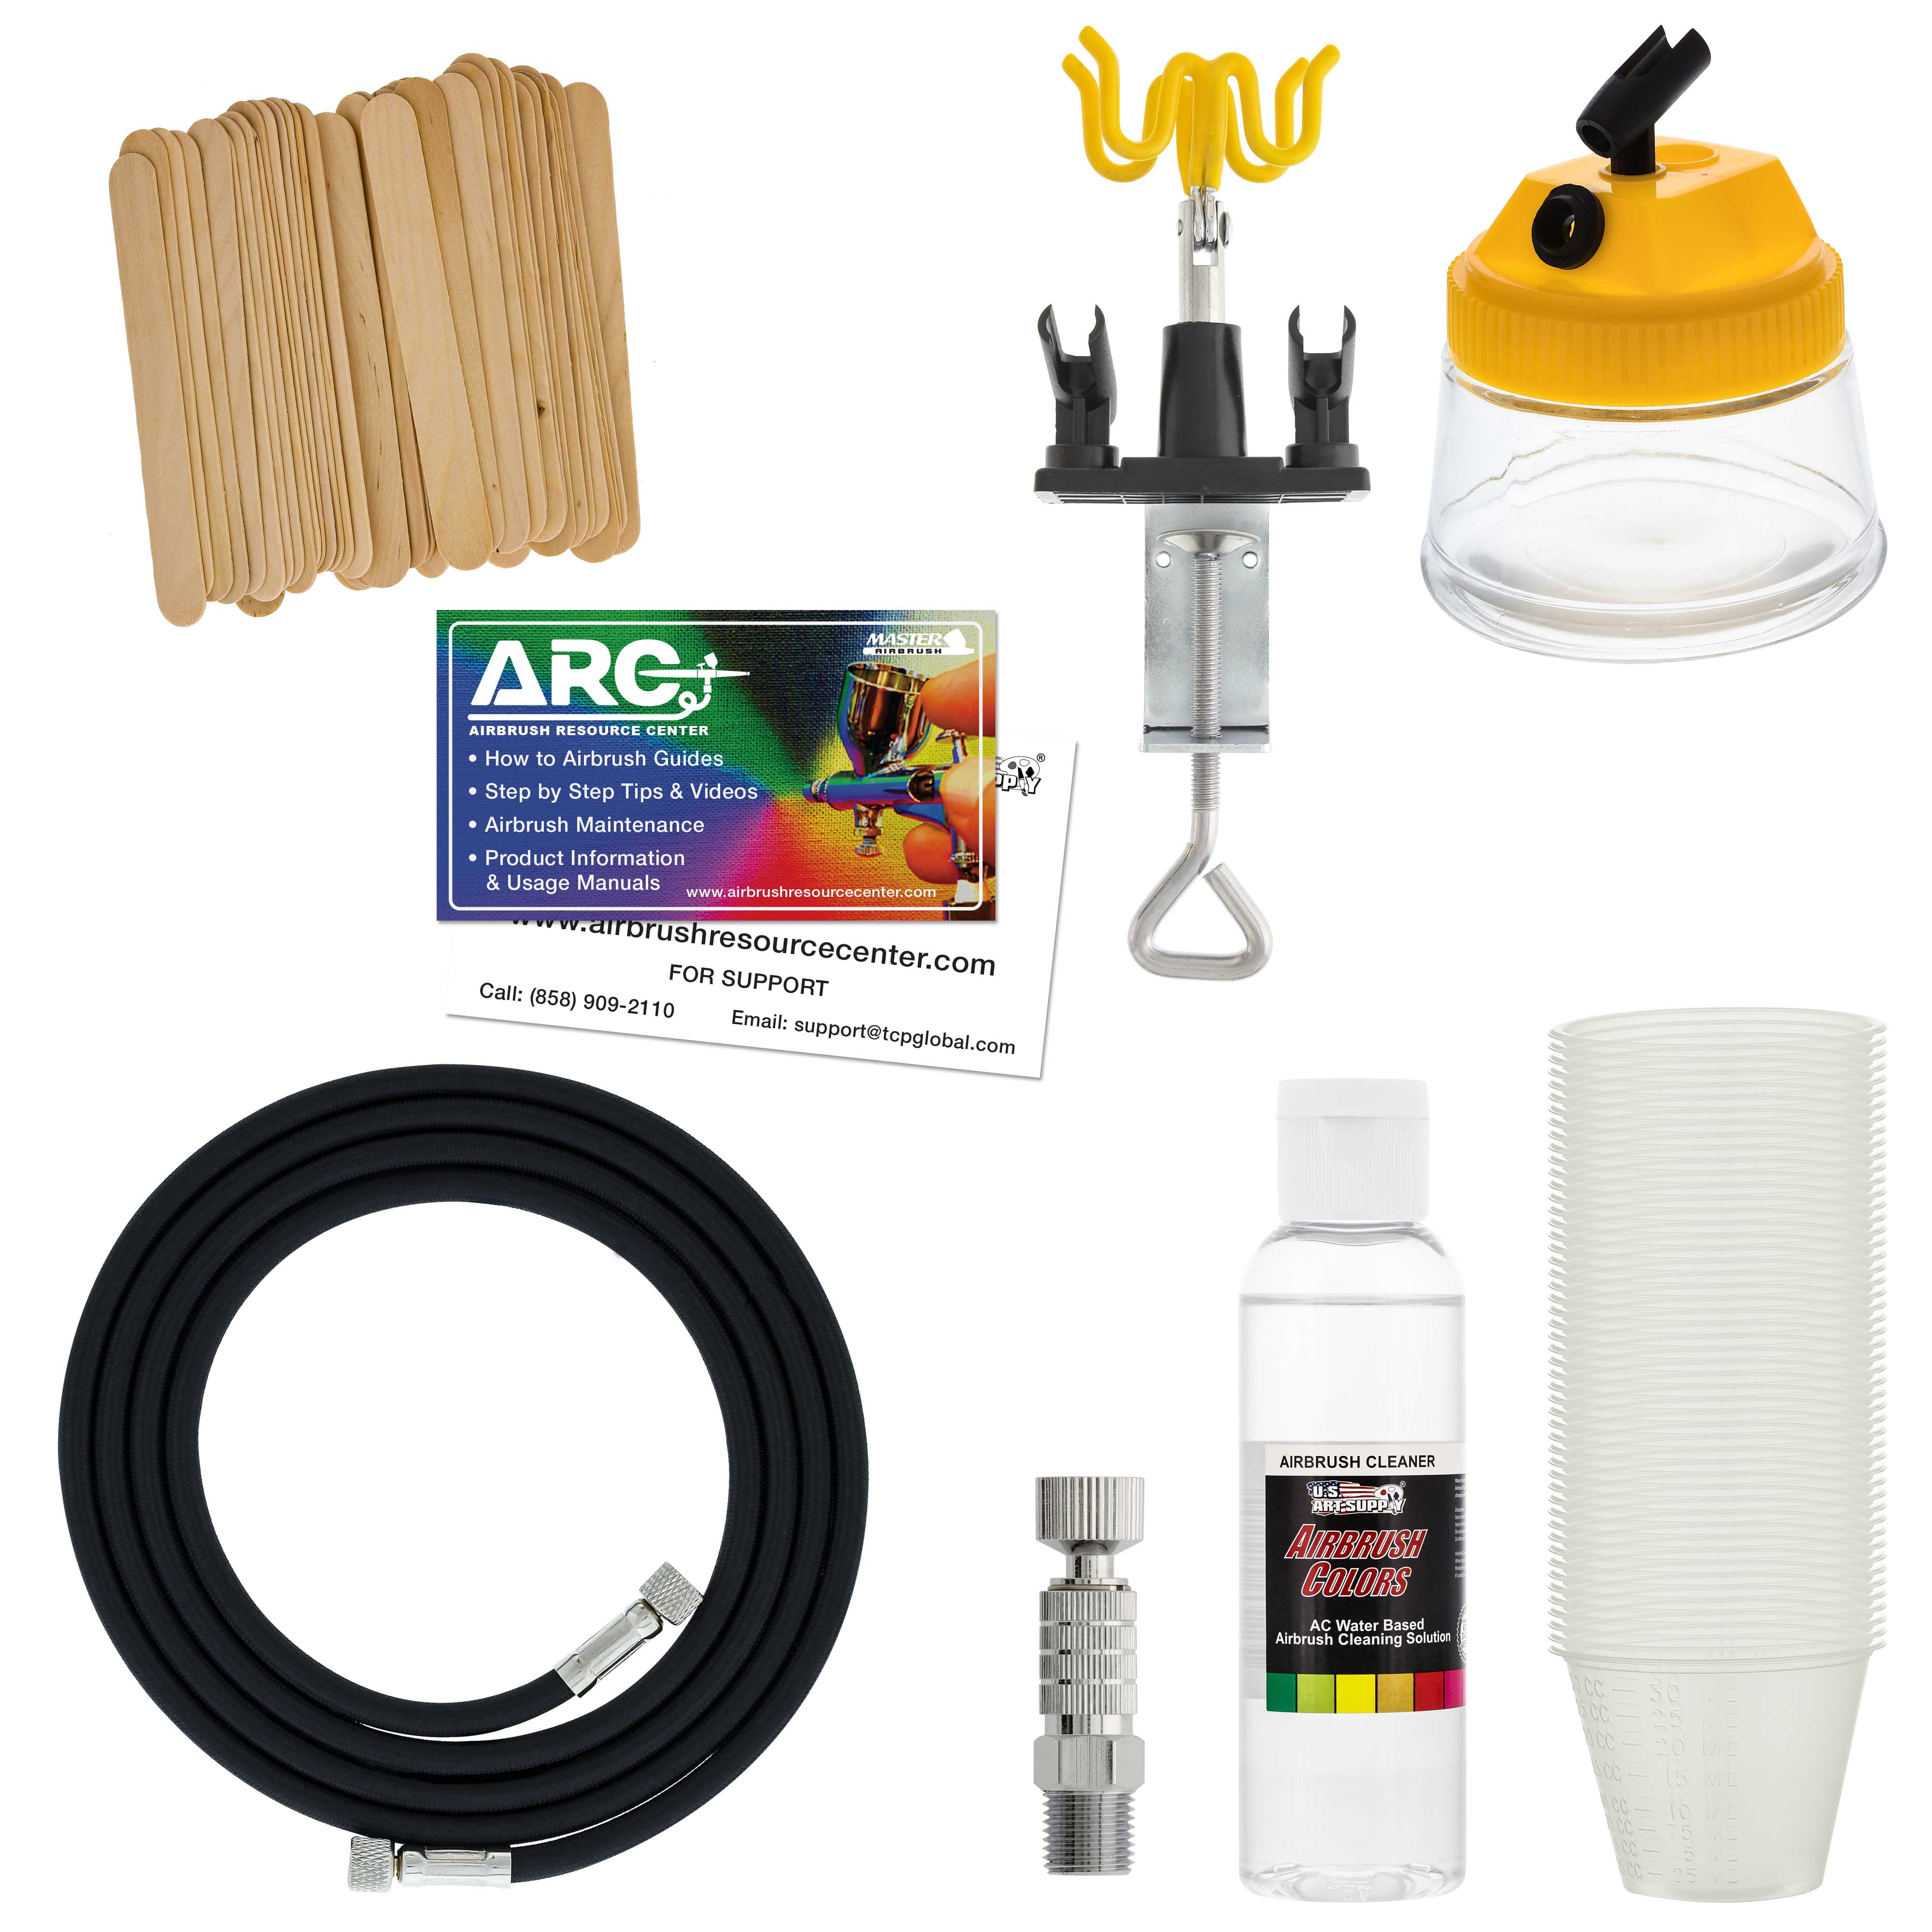 Dual Fan Air Compressor Airbrushing System Kit with 2 Airbrushes - 6 Color  Acrylic Paint Set, Bundle - Metro Market